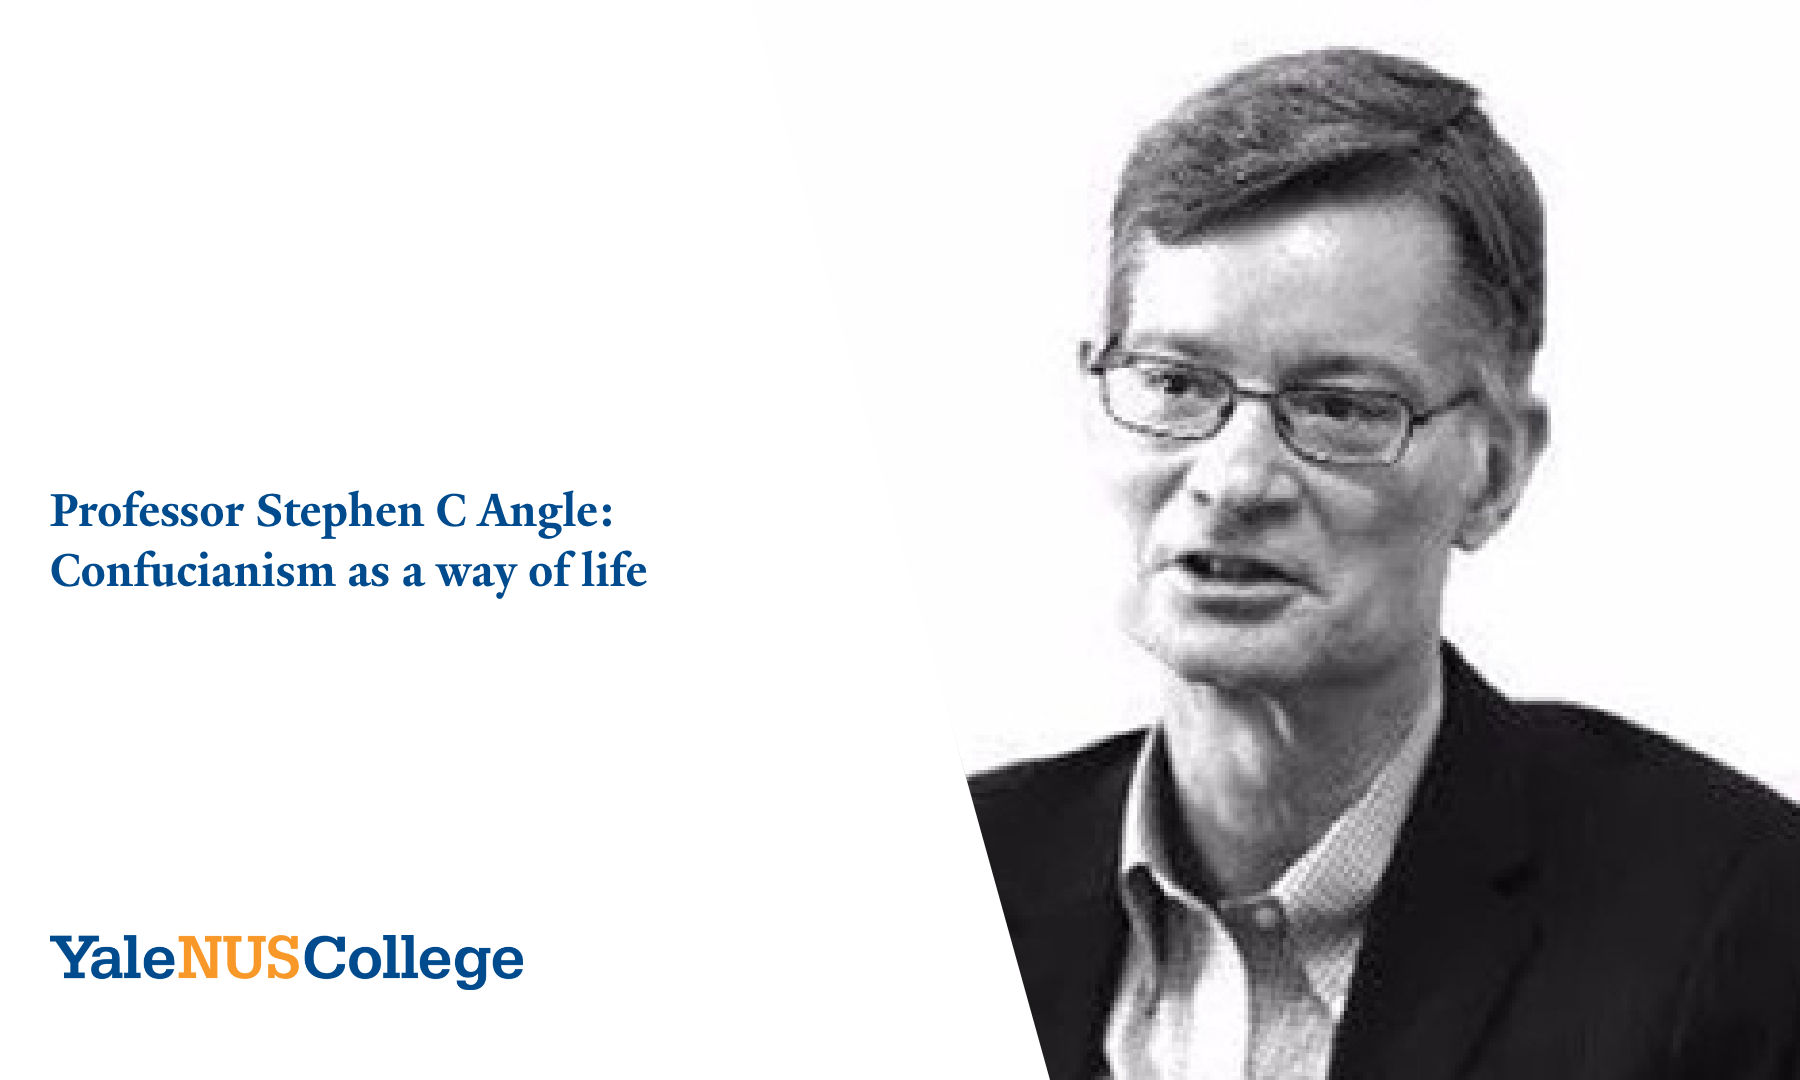 Professor Stephen C Angle: Confucianism as a way of life